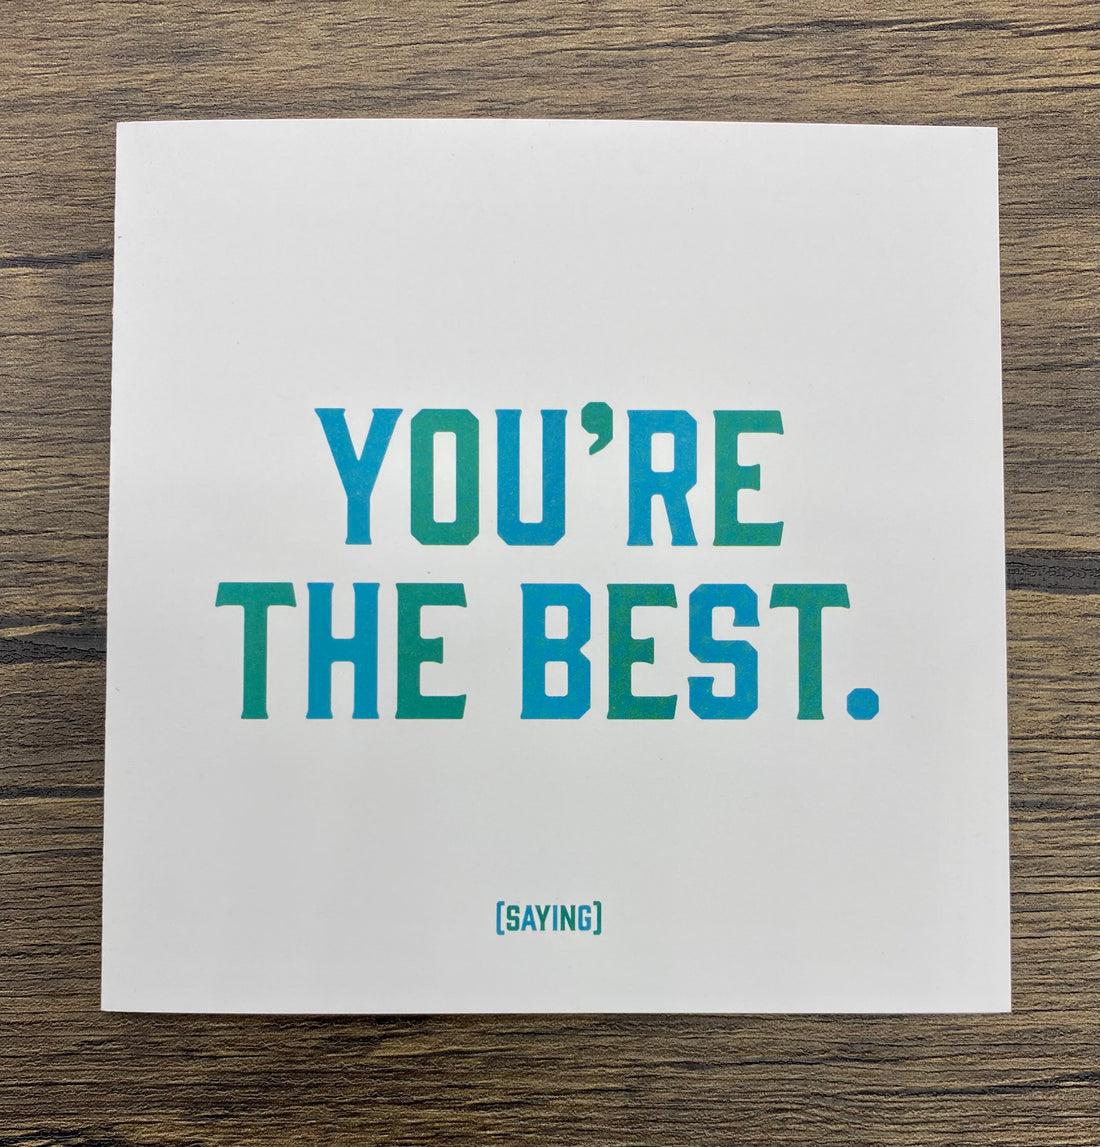 Quotable Card: You're the best.